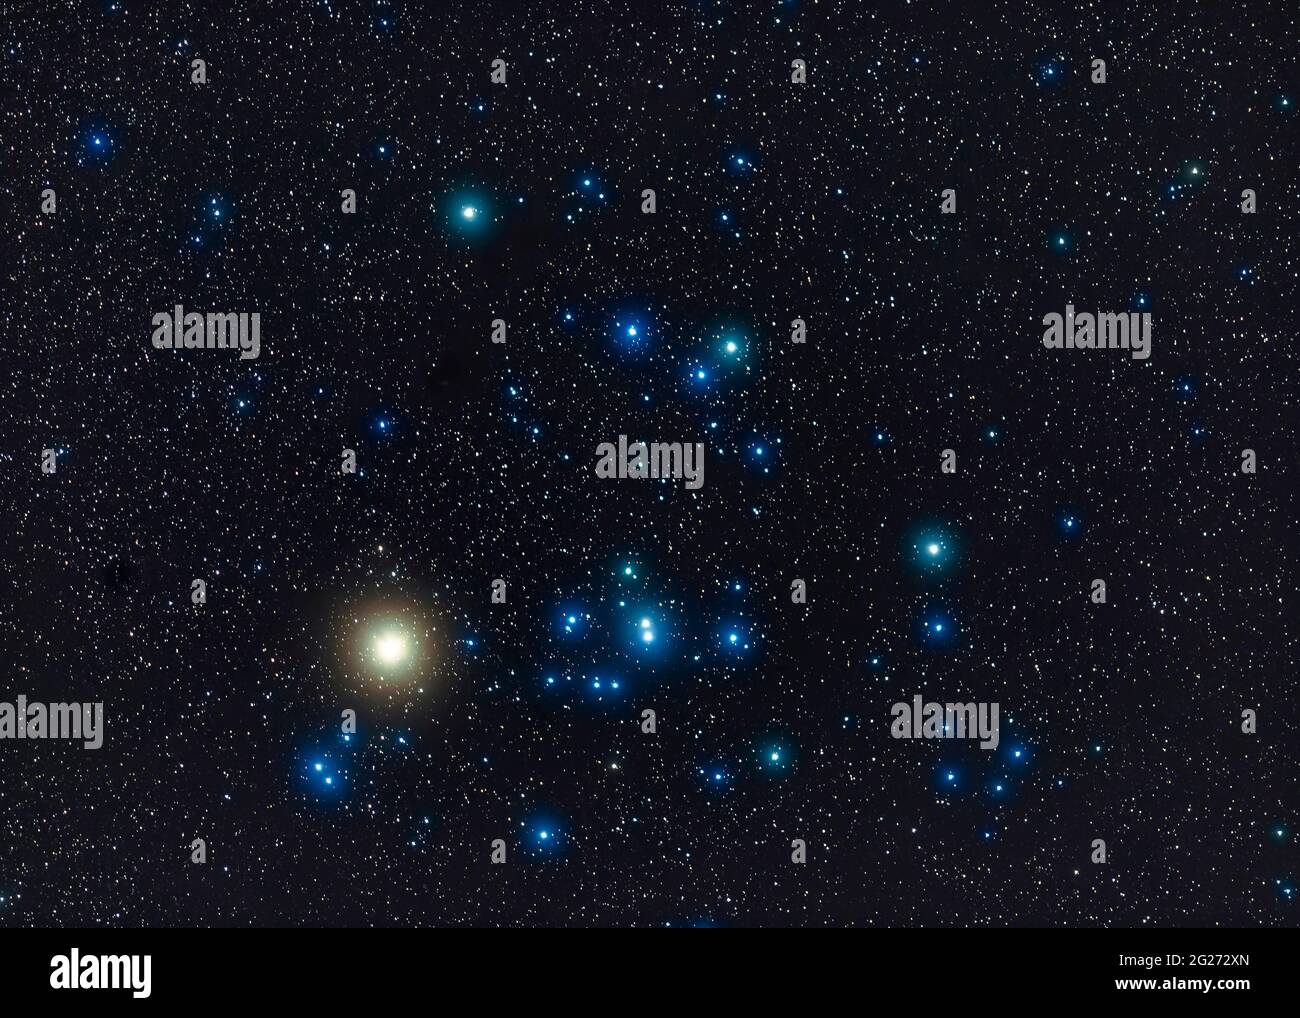 The Hyades star cluster with the red giant star Aldebaran. Stock Photo